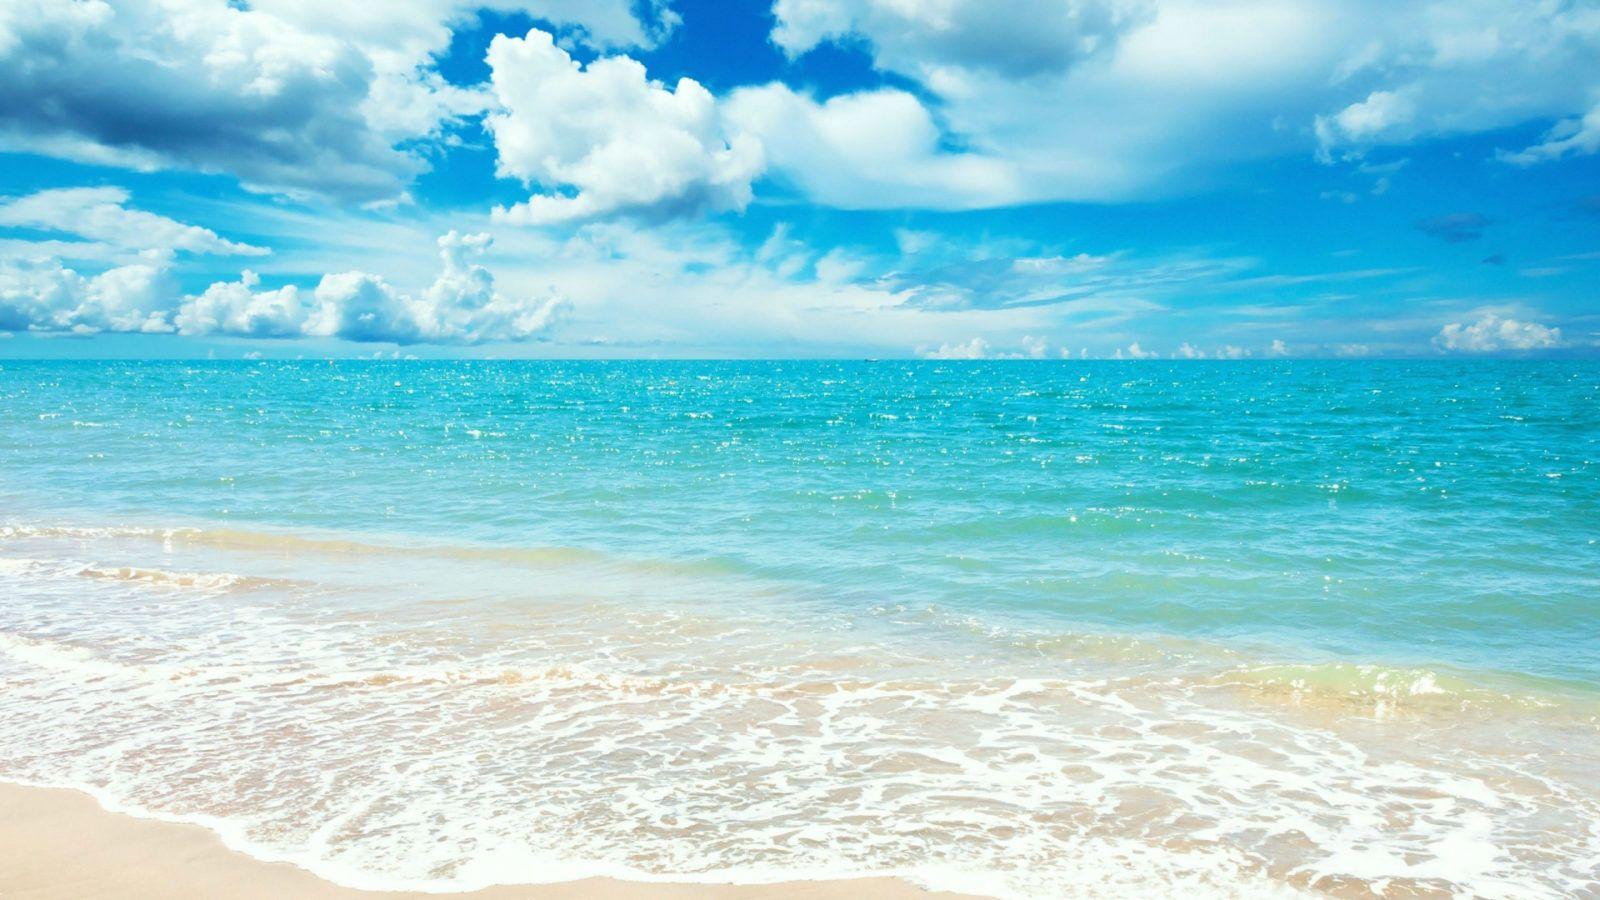 129 Beach Wallpapers Examples To Put On Your Desktop Backgrounds